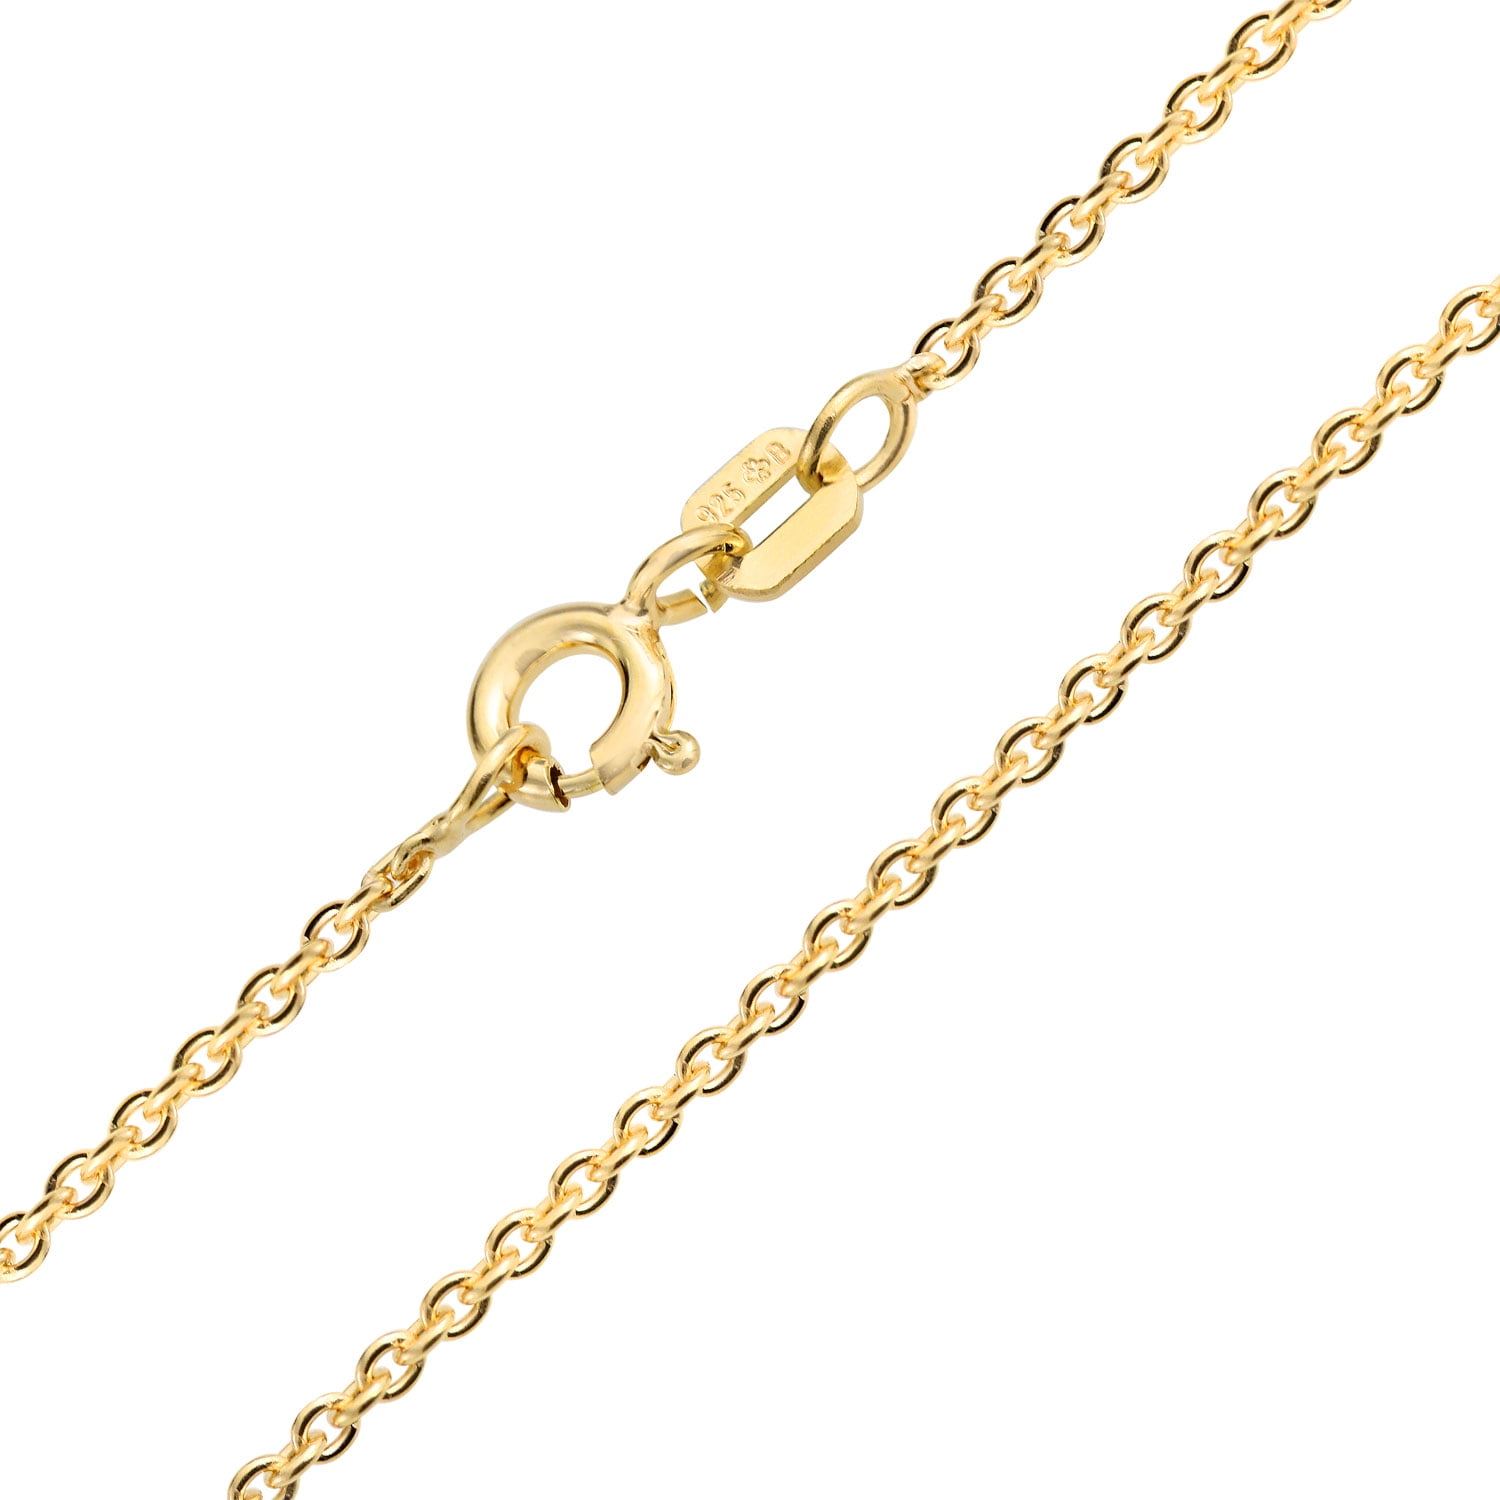 Vermeil 1.5mm Rolo Chain 14k Gold Plated over Sterling Silver 16,18,20,22,24,30" 